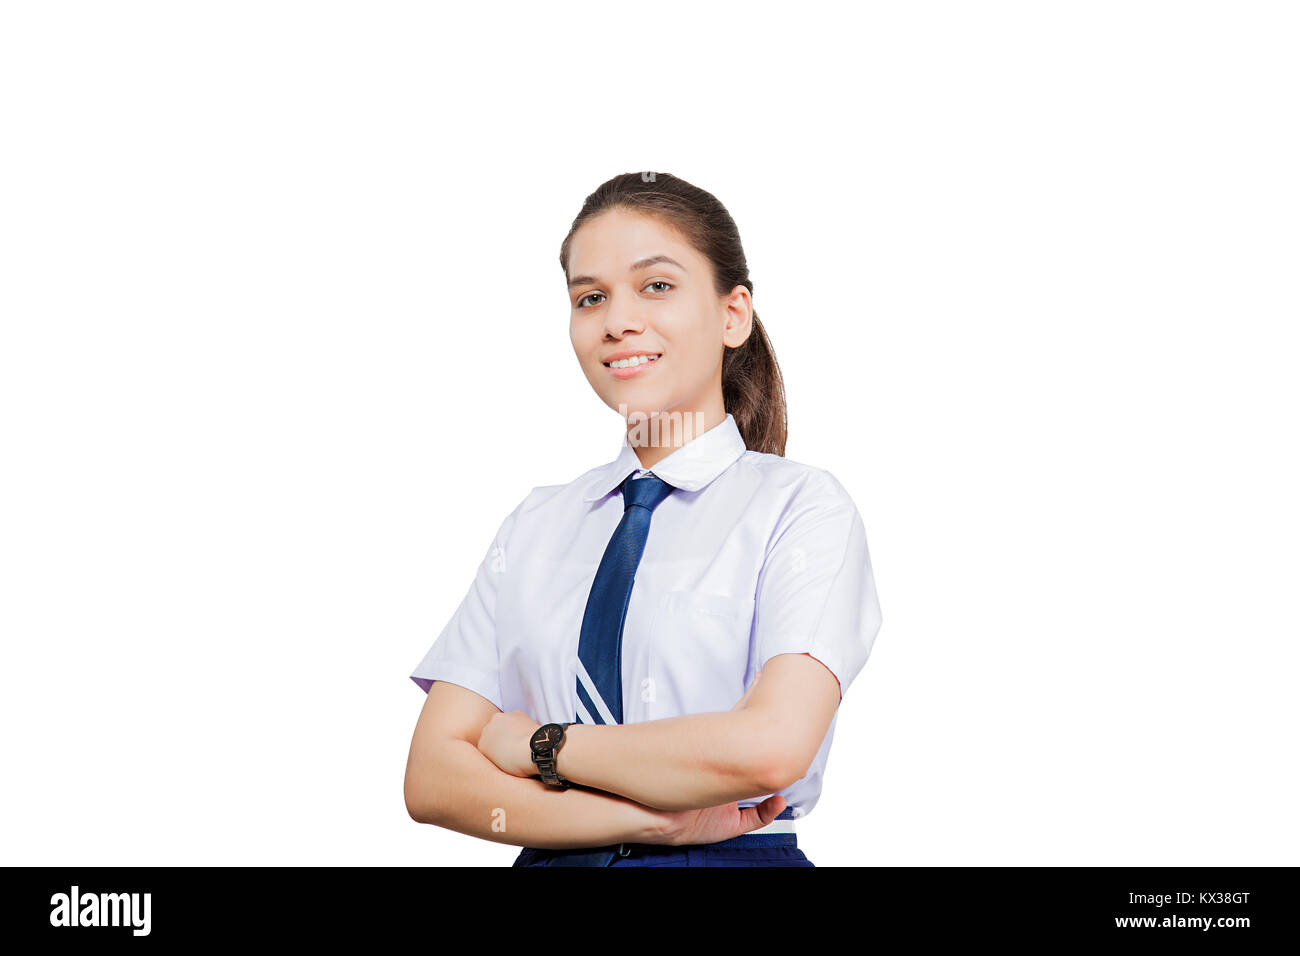 1 Indian School Young Girl Student Arms Crossed Standing Smiling Stock Photo